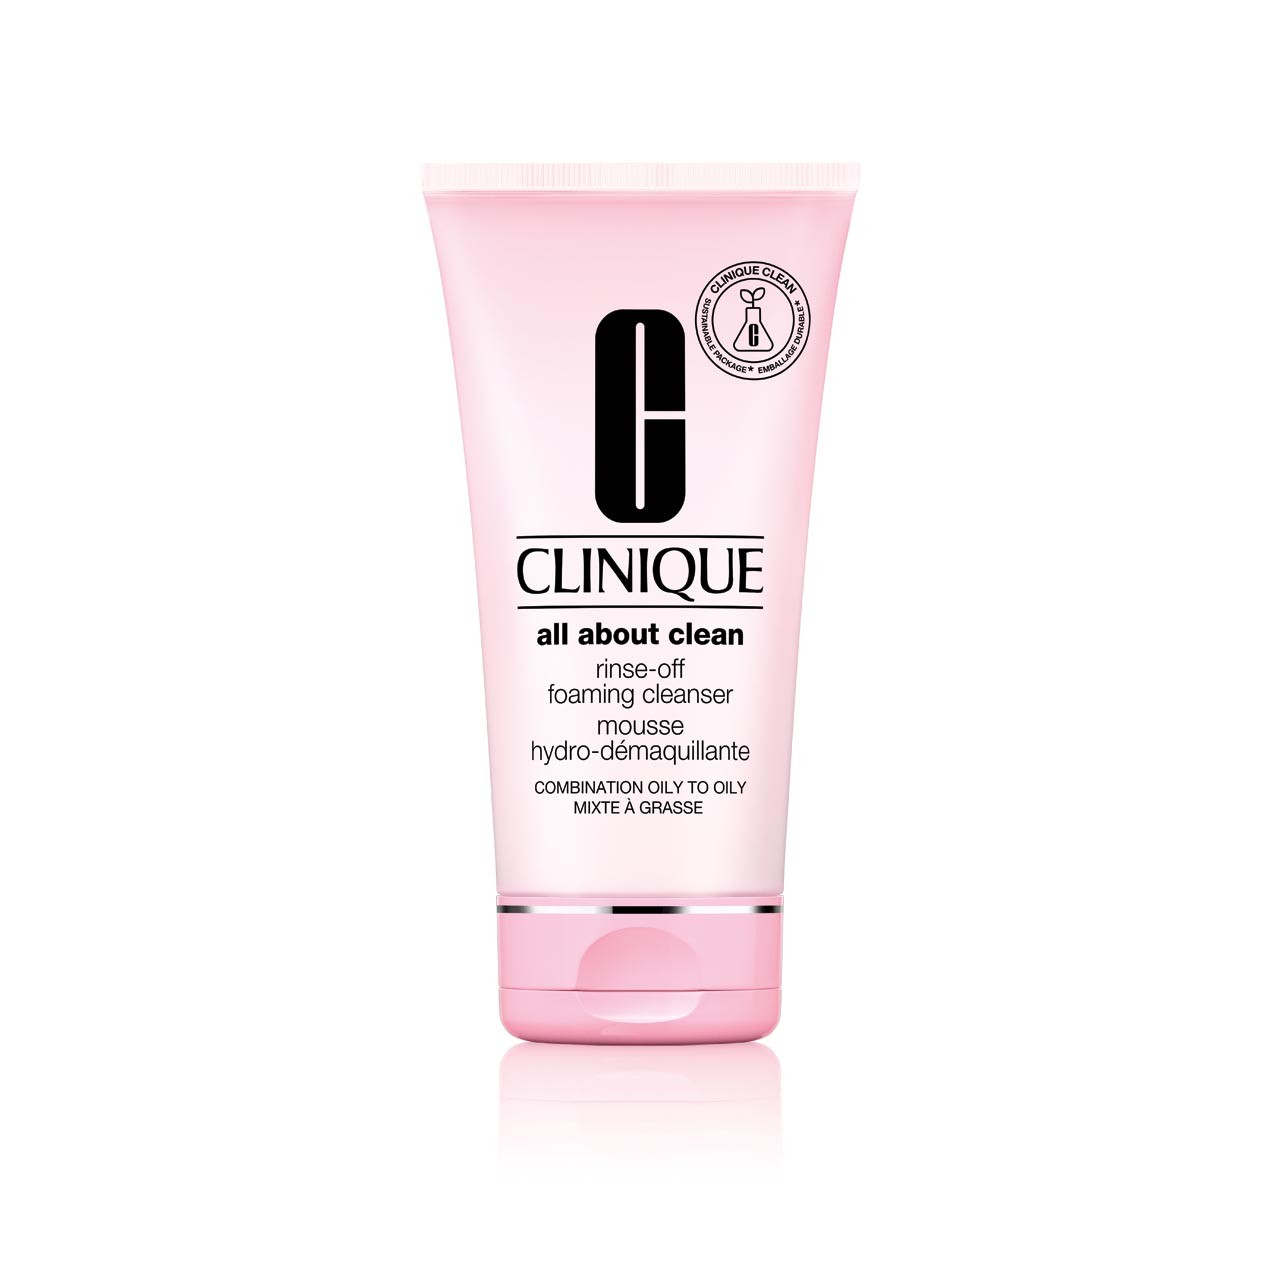 Clinique - All About Clean Rinse-Off Foaming Cleanser - 